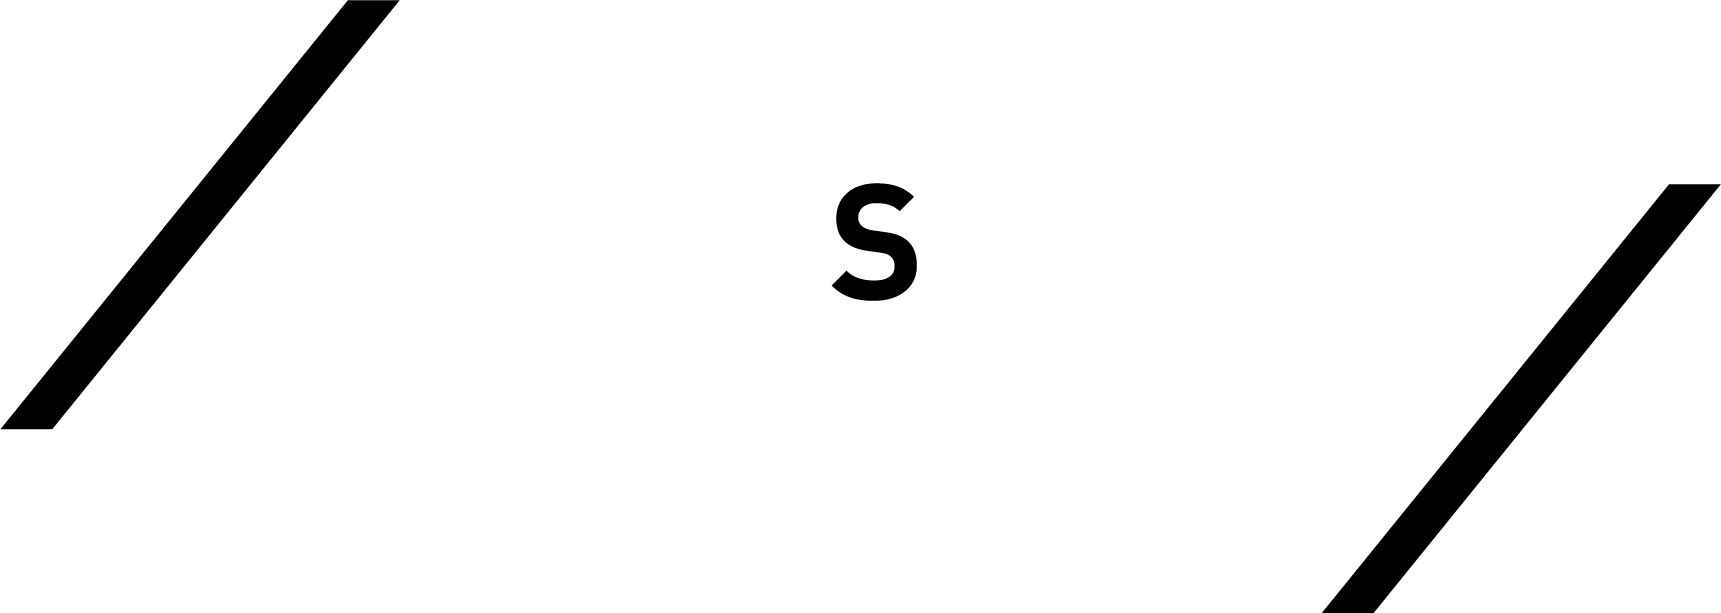 MESSAGE From NRI SECURE